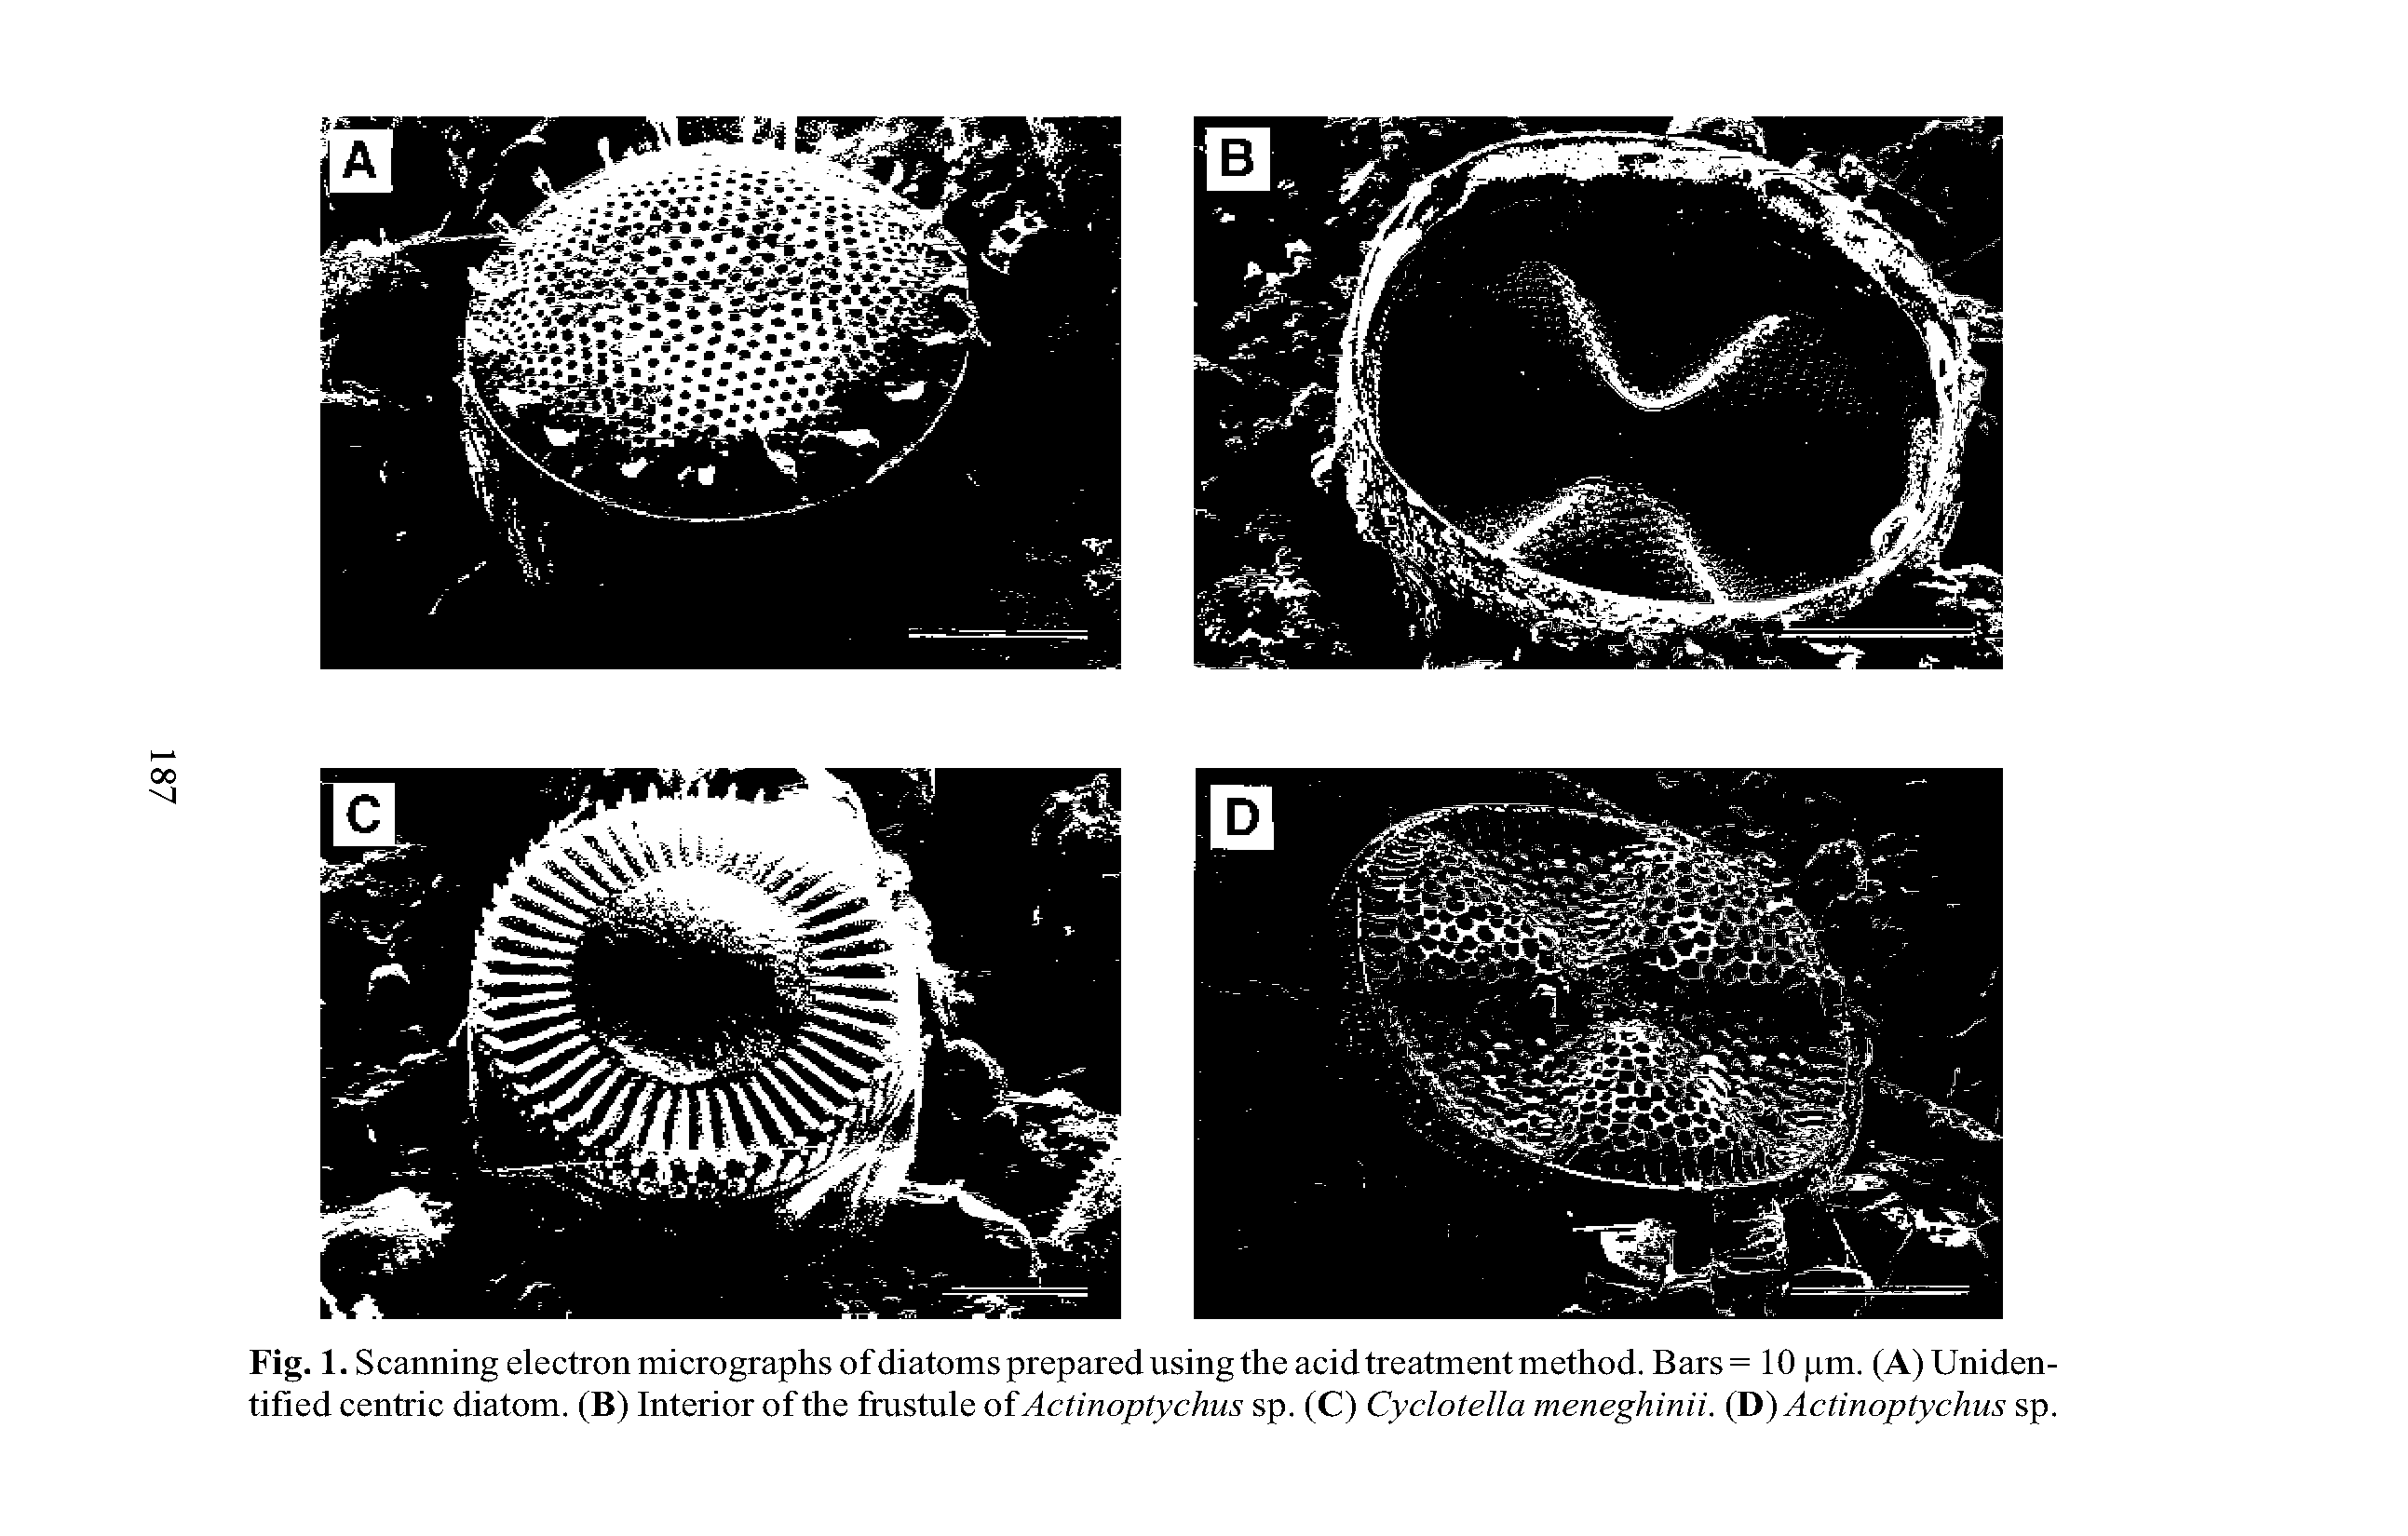 Fig. 1. Scanning electron micrographs of diatoms prepared using the acid treatment method. Bars= 10 pm. (A) Unidentified centric diatom. (B) Interior of the frustule of Actinoptychus sp. (C) Cyclotella meneghinii. (D) Actinoptychus sp.